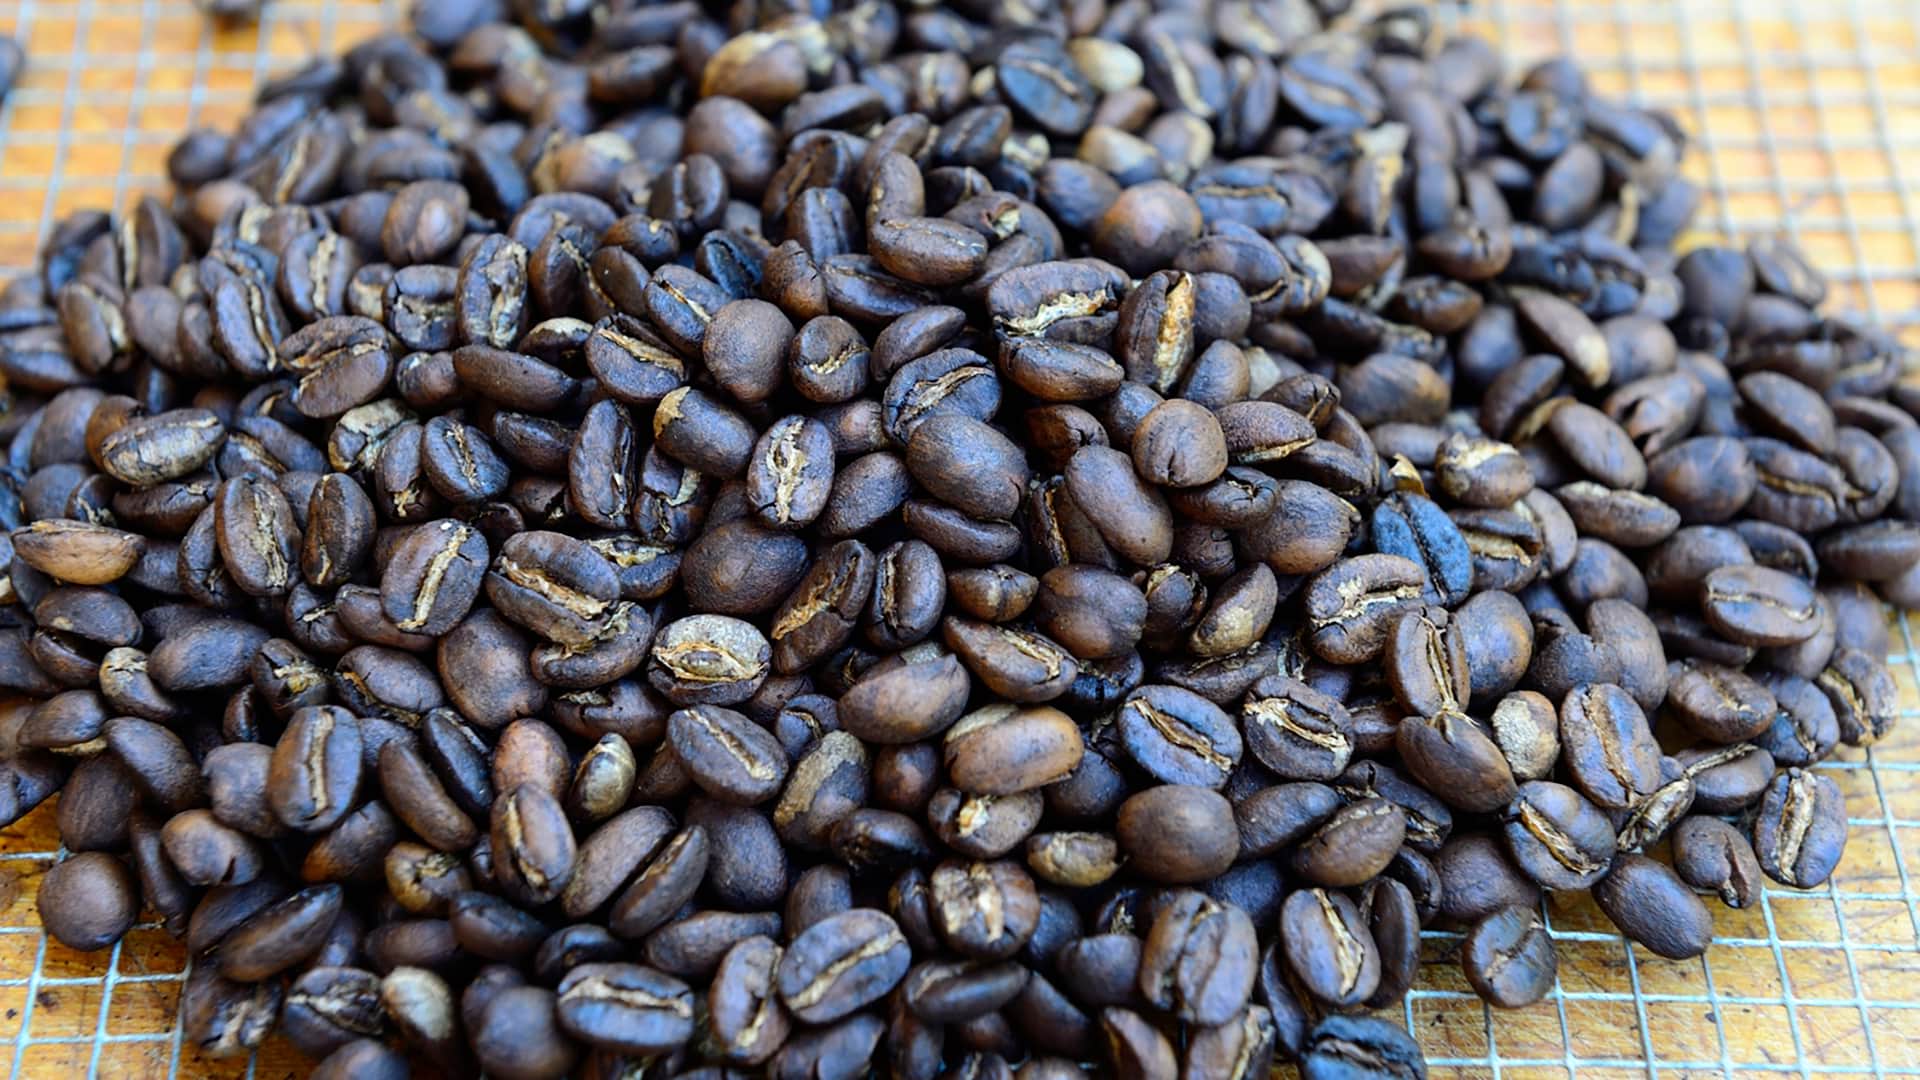 11Traditionally roasted coffee beans. Coffee Route to Machu Picchu - RESPONSible Travel Peru